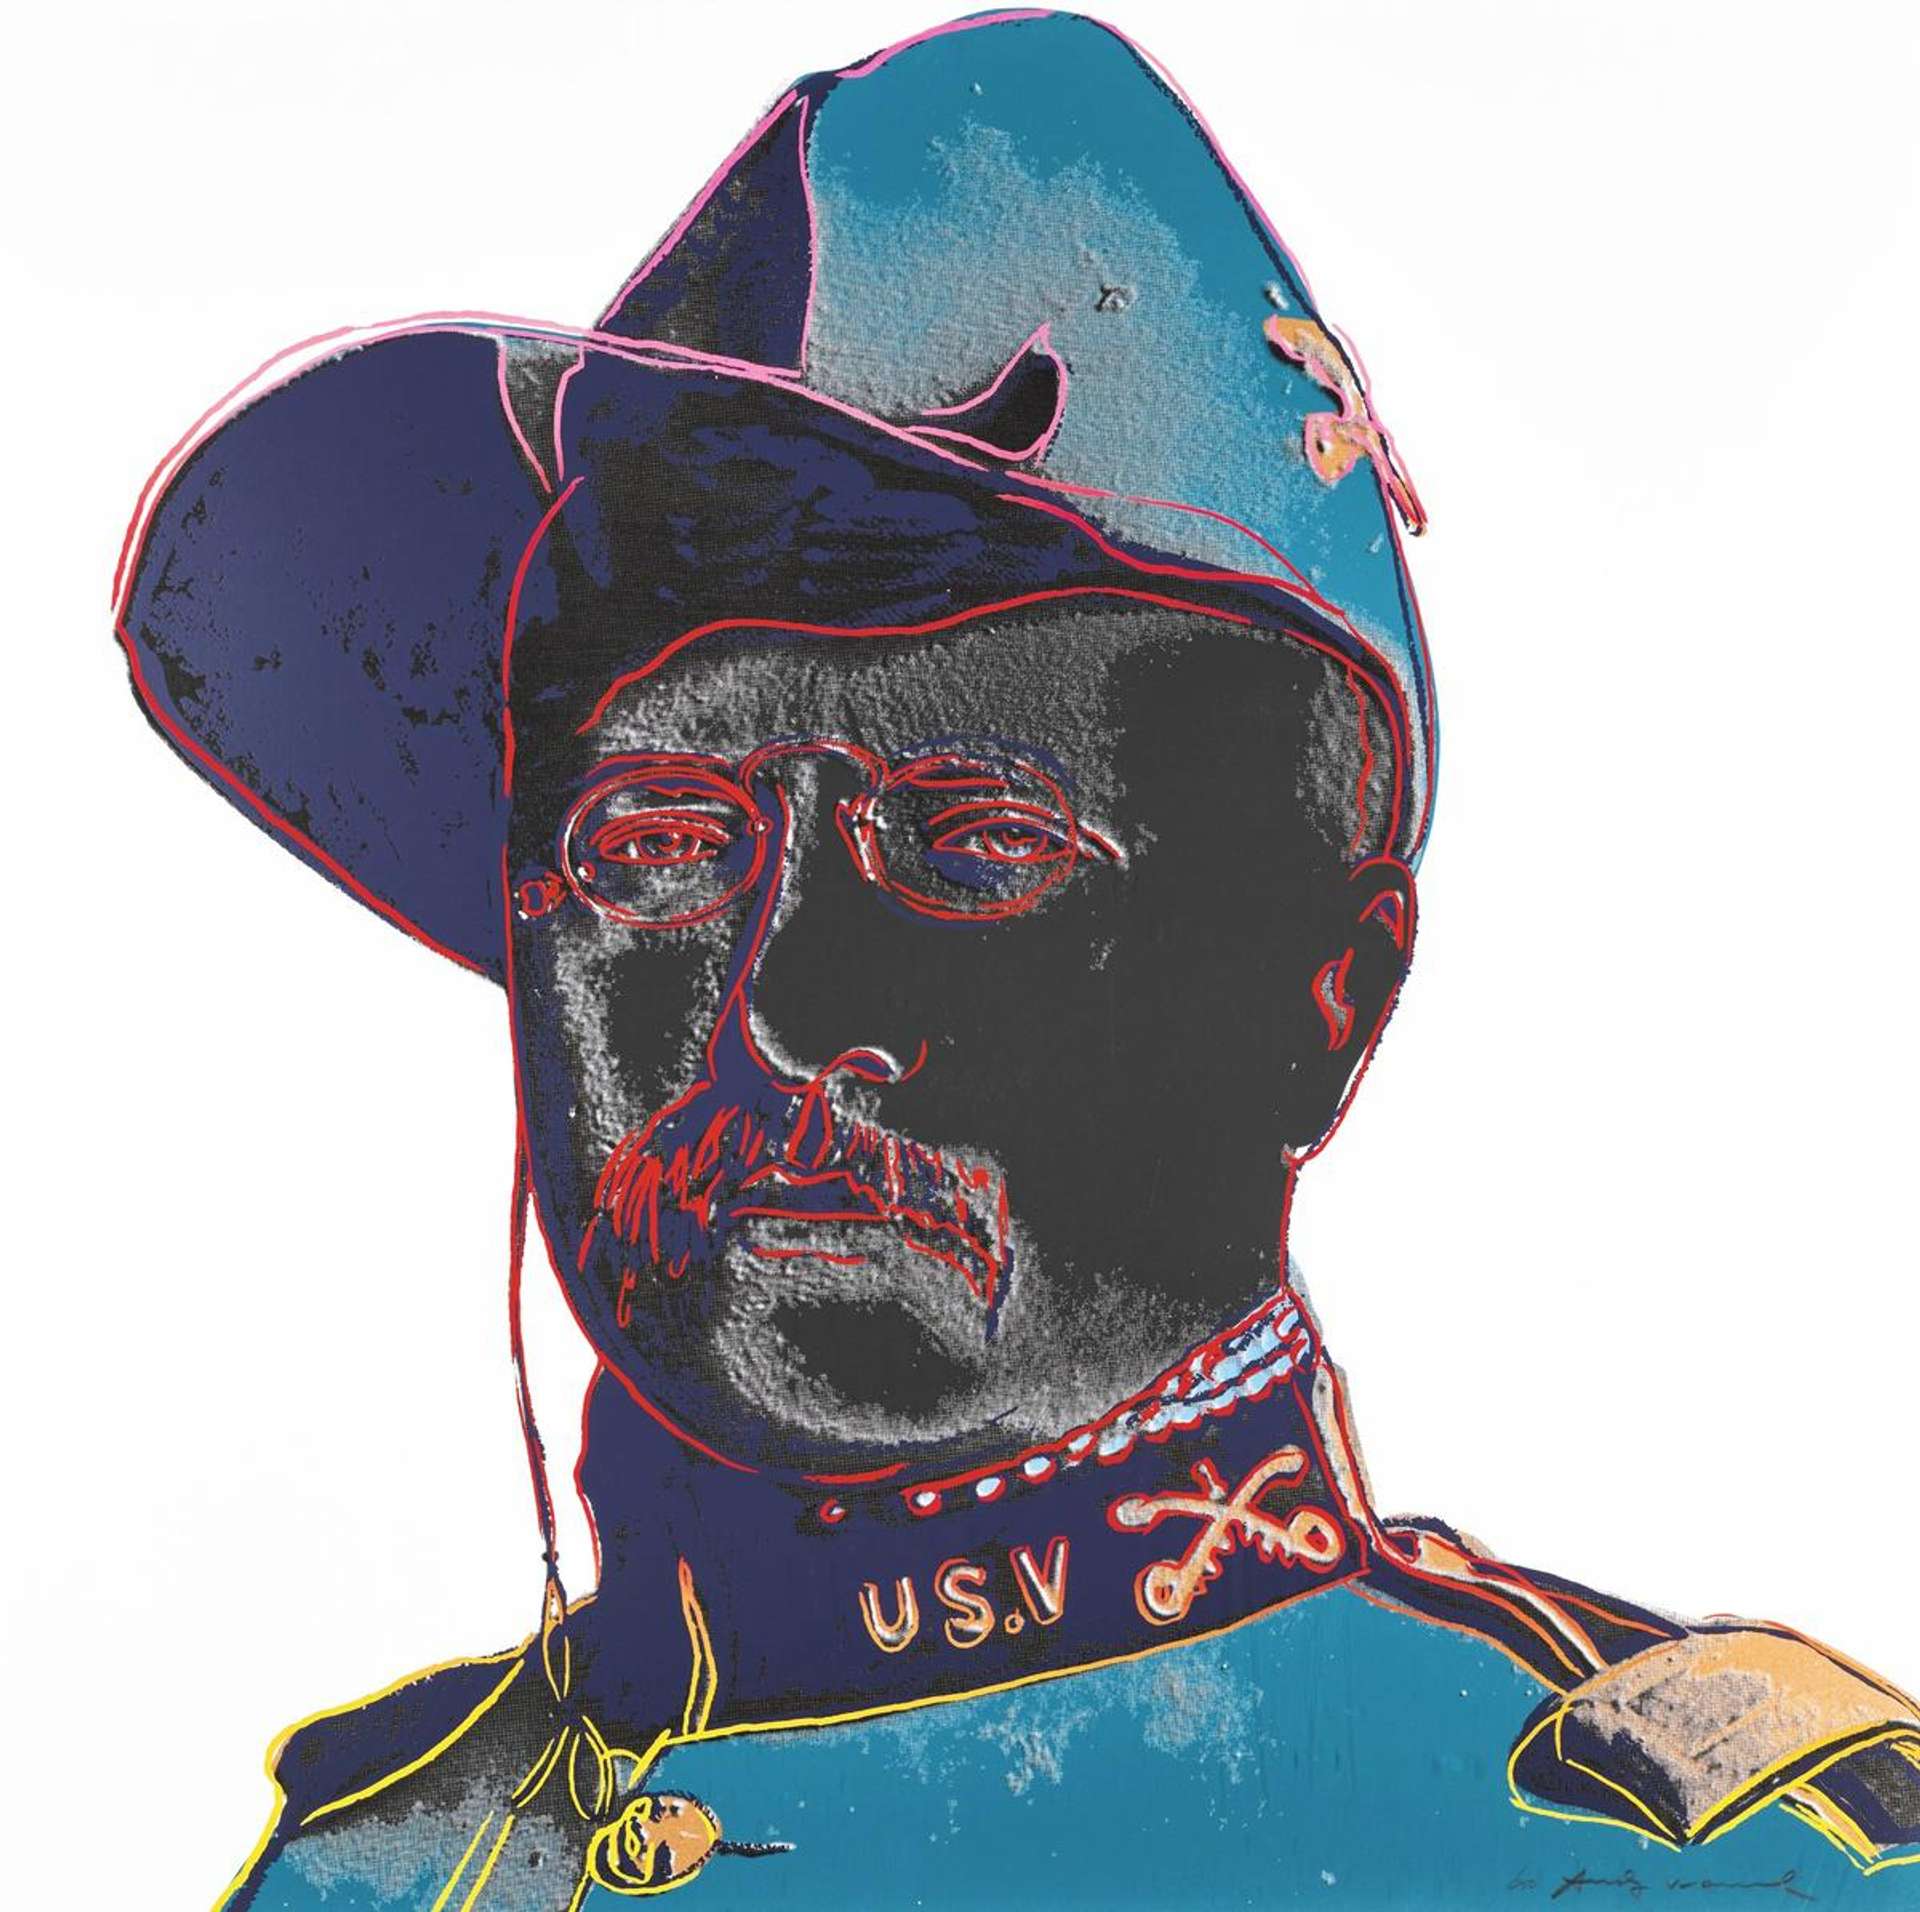 Andy Warhol: Teddy Roosevelt (F. & S. II.386) - Signed Print